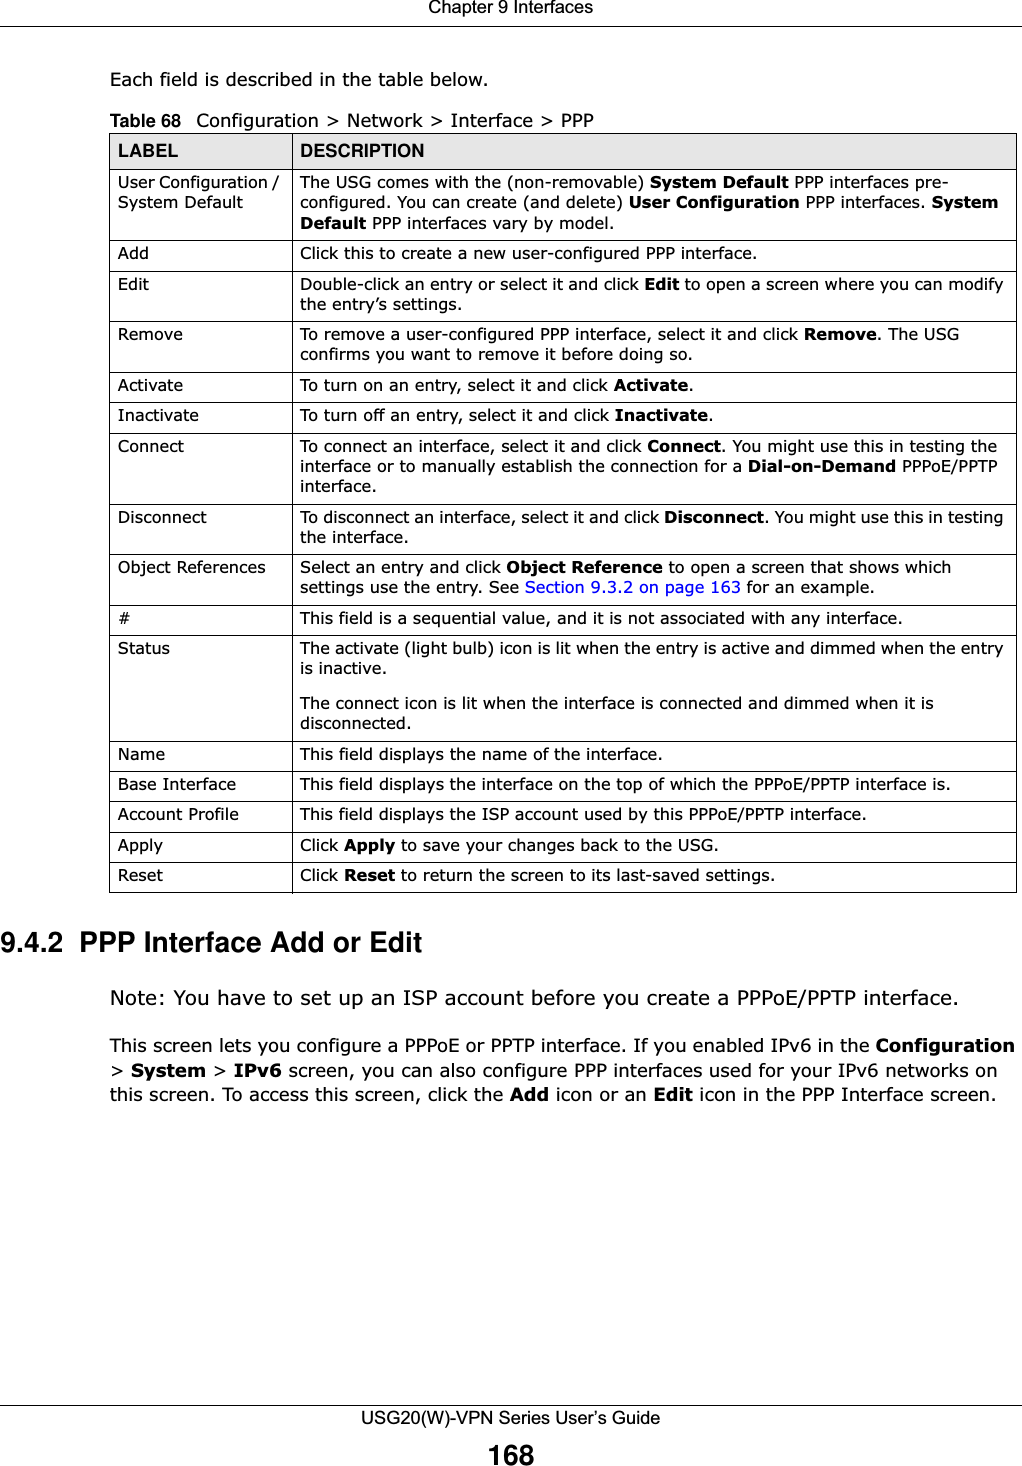 Chapter 9 InterfacesUSG20(W)-VPN Series User’s Guide168Each field is described in the table below.9.4.2  PPP Interface Add or Edit Note: You have to set up an ISP account before you create a PPPoE/PPTP interface.This screen lets you configure a PPPoE or PPTP interface. If you enabled IPv6 in the Configuration &gt; System &gt; IPv6 screen, you can also configure PPP interfaces used for your IPv6 networks on this screen. To access this screen, click the Add icon or an Edit icon in the PPP Interface screen.Table 68   Configuration &gt; Network &gt; Interface &gt; PPPLABEL DESCRIPTIONUser Configuration / System DefaultThe USG comes with the (non-removable) System Default PPP interfaces pre-configured. You can create (and delete) User Configuration PPP interfaces. System Default PPP interfaces vary by model.Add Click this to create a new user-configured PPP interface.Edit Double-click an entry or select it and click Edit to open a screen where you can modify the entry’s settings. Remove To remove a user-configured PPP interface, select it and click Remove. The USG confirms you want to remove it before doing so.Activate To turn on an entry, select it and click Activate.Inactivate To turn off an entry, select it and click Inactivate.Connect To connect an interface, select it and click Connect. You might use this in testing the interface or to manually establish the connection for a Dial-on-Demand PPPoE/PPTP interface.Disconnect To disconnect an interface, select it and click Disconnect. You might use this in testing the interface.Object References Select an entry and click Object Reference to open a screen that shows which settings use the entry. See Section 9.3.2 on page 163 for an example.#This field is a sequential value, and it is not associated with any interface.Status The activate (light bulb) icon is lit when the entry is active and dimmed when the entry is inactive.The connect icon is lit when the interface is connected and dimmed when it is disconnected.Name This field displays the name of the interface.Base Interface This field displays the interface on the top of which the PPPoE/PPTP interface is.Account Profile This field displays the ISP account used by this PPPoE/PPTP interface.Apply Click Apply to save your changes back to the USG.Reset Click Reset to return the screen to its last-saved settings. 